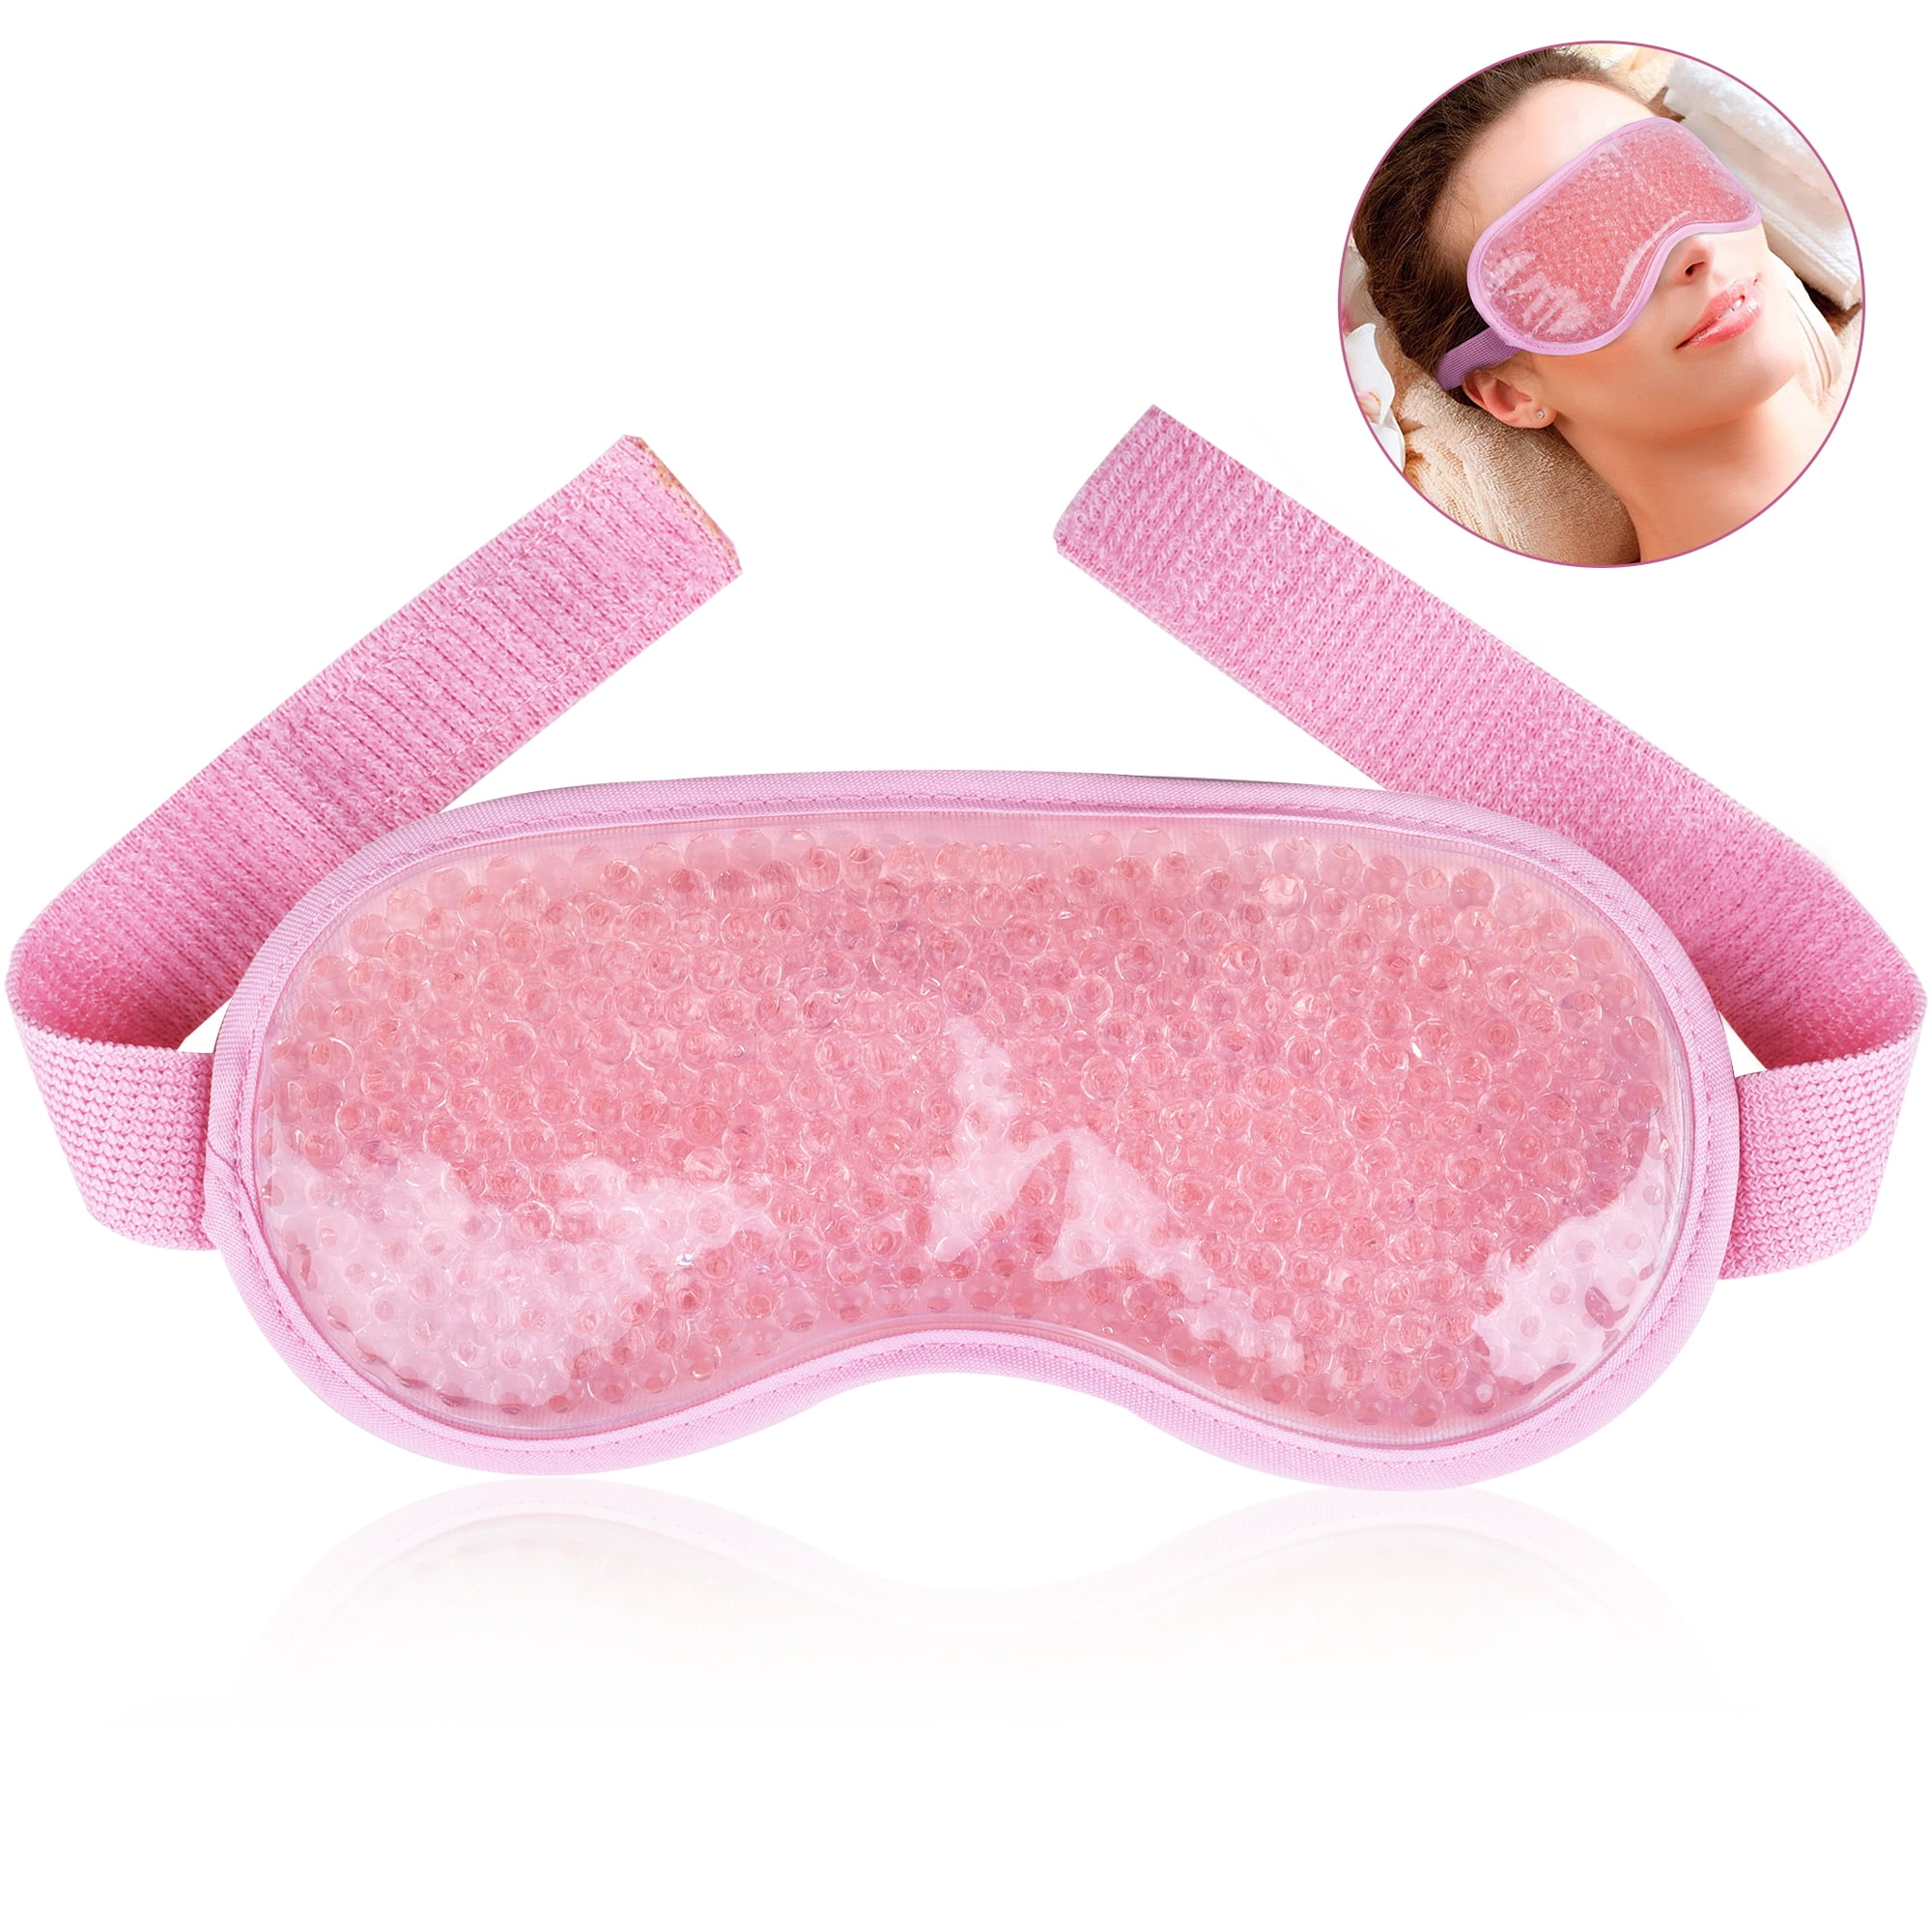 LotFancy Eye Mask, Reusable Puffy Beads Ice Pack for Hot Cold Therapy - Walmart.com